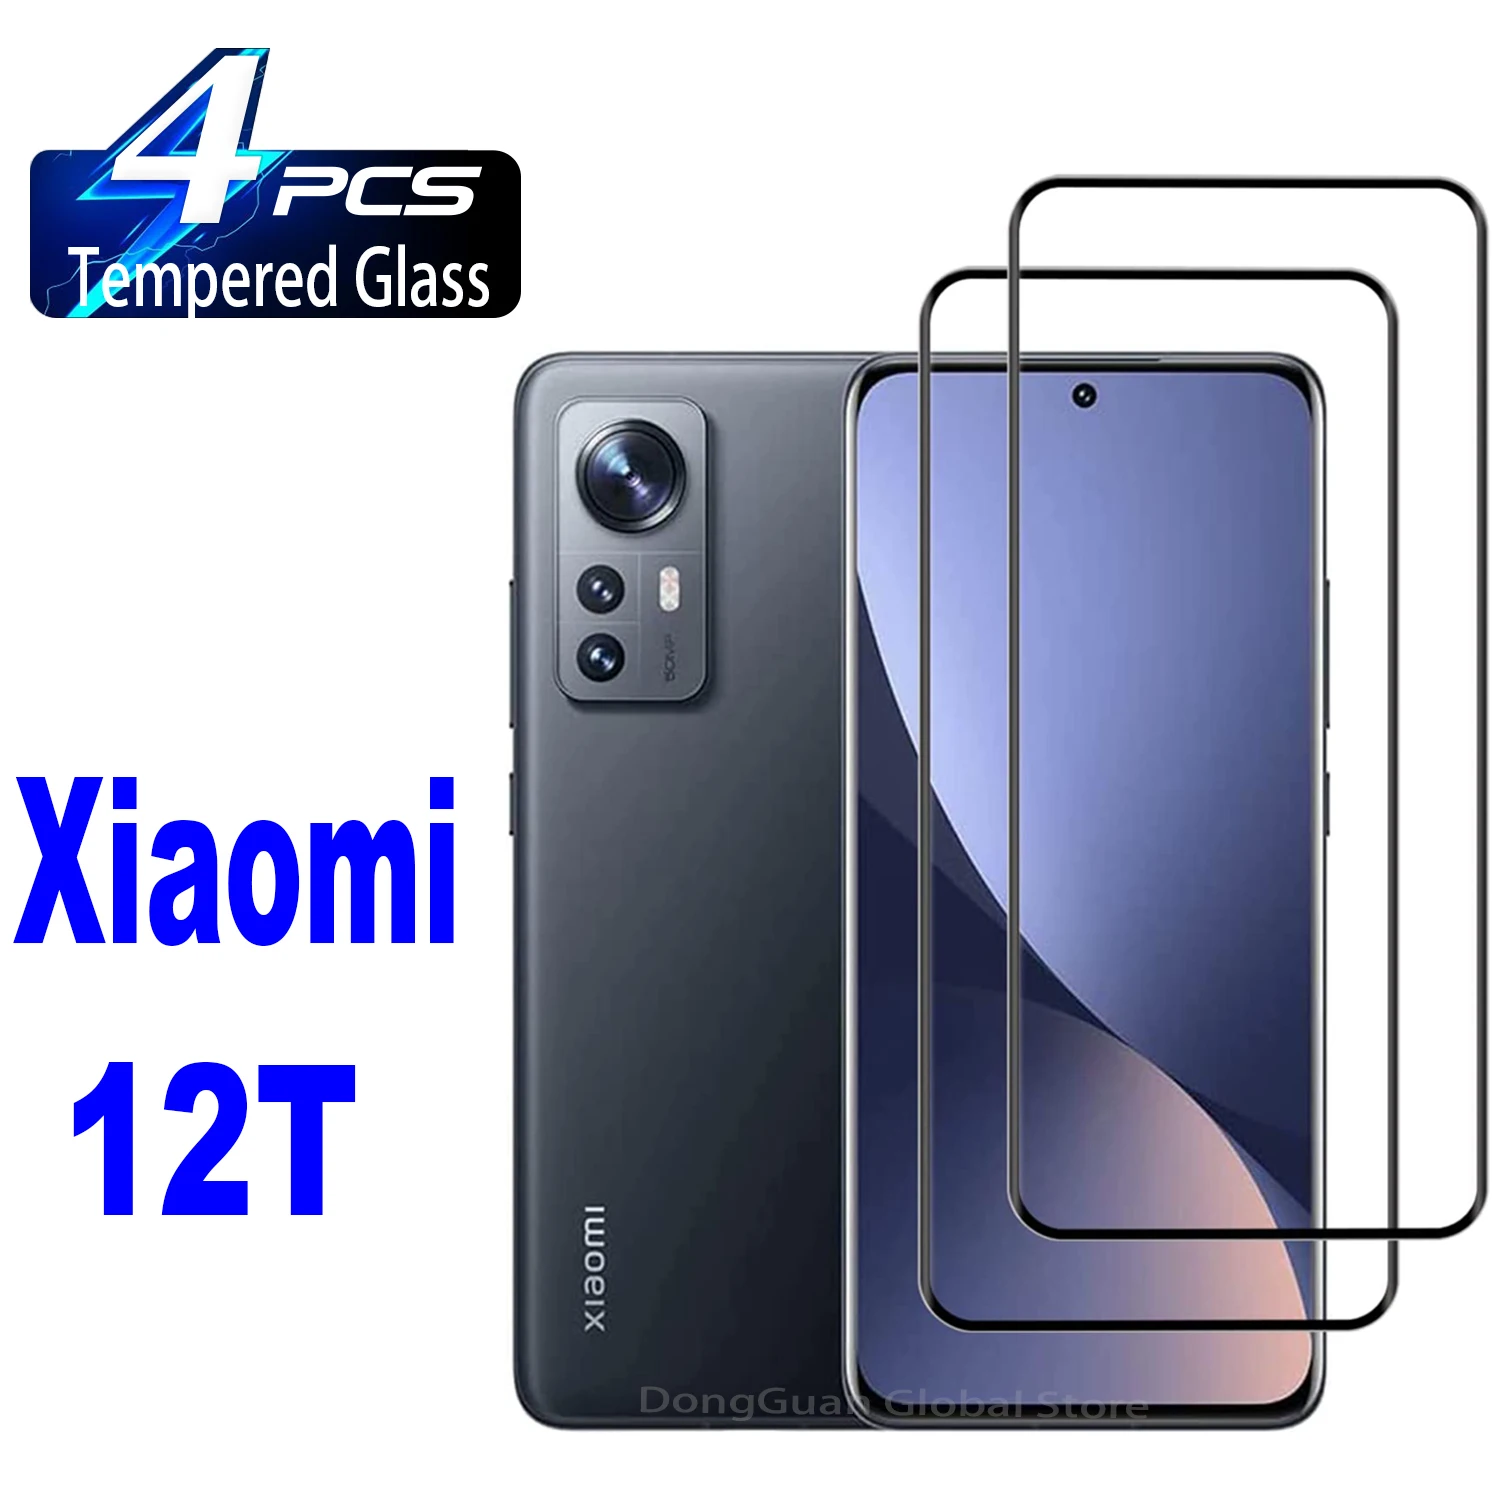 2/4Pcs Tempered Glass For Xiaomi 12T Pro Screen Protector Glass Film 2 4pcs tempered glass for huawei p smart pro 2019 2020 2021 s z screen protector glass film